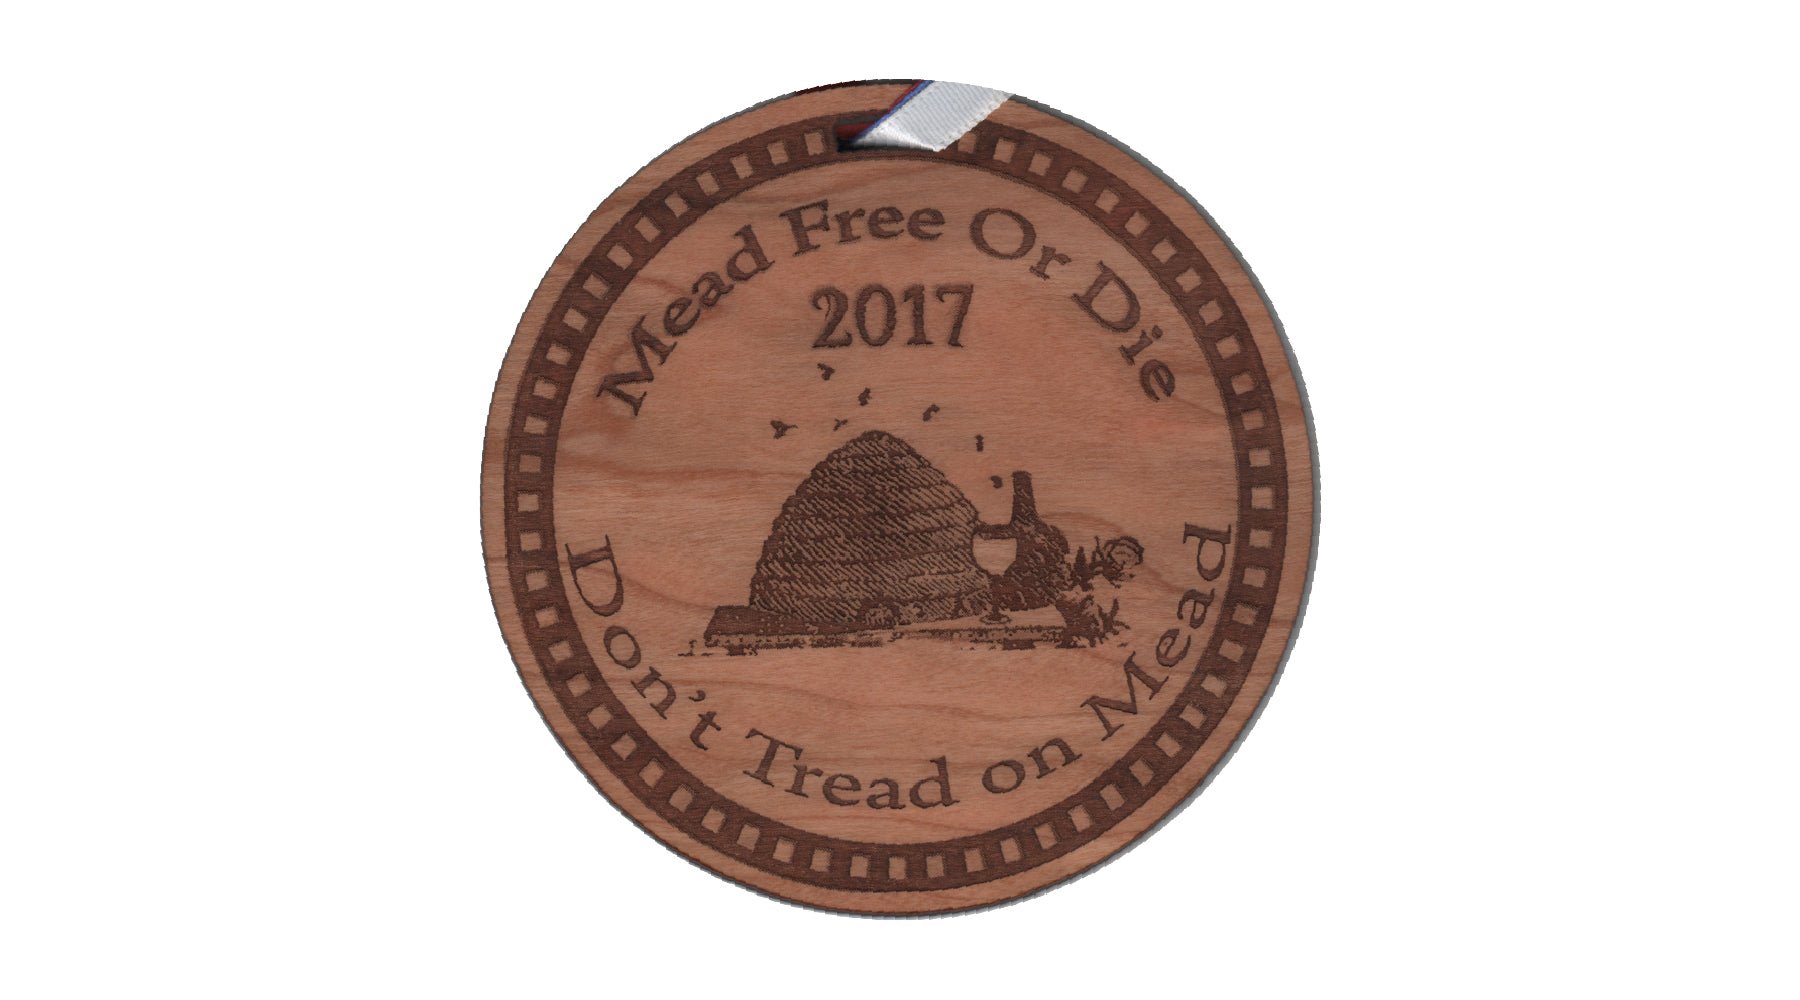 Costa Rica Meadery Wins Silver Medal at 2017 Mead Free or Die Mead Competition - Costa Rica Meadery